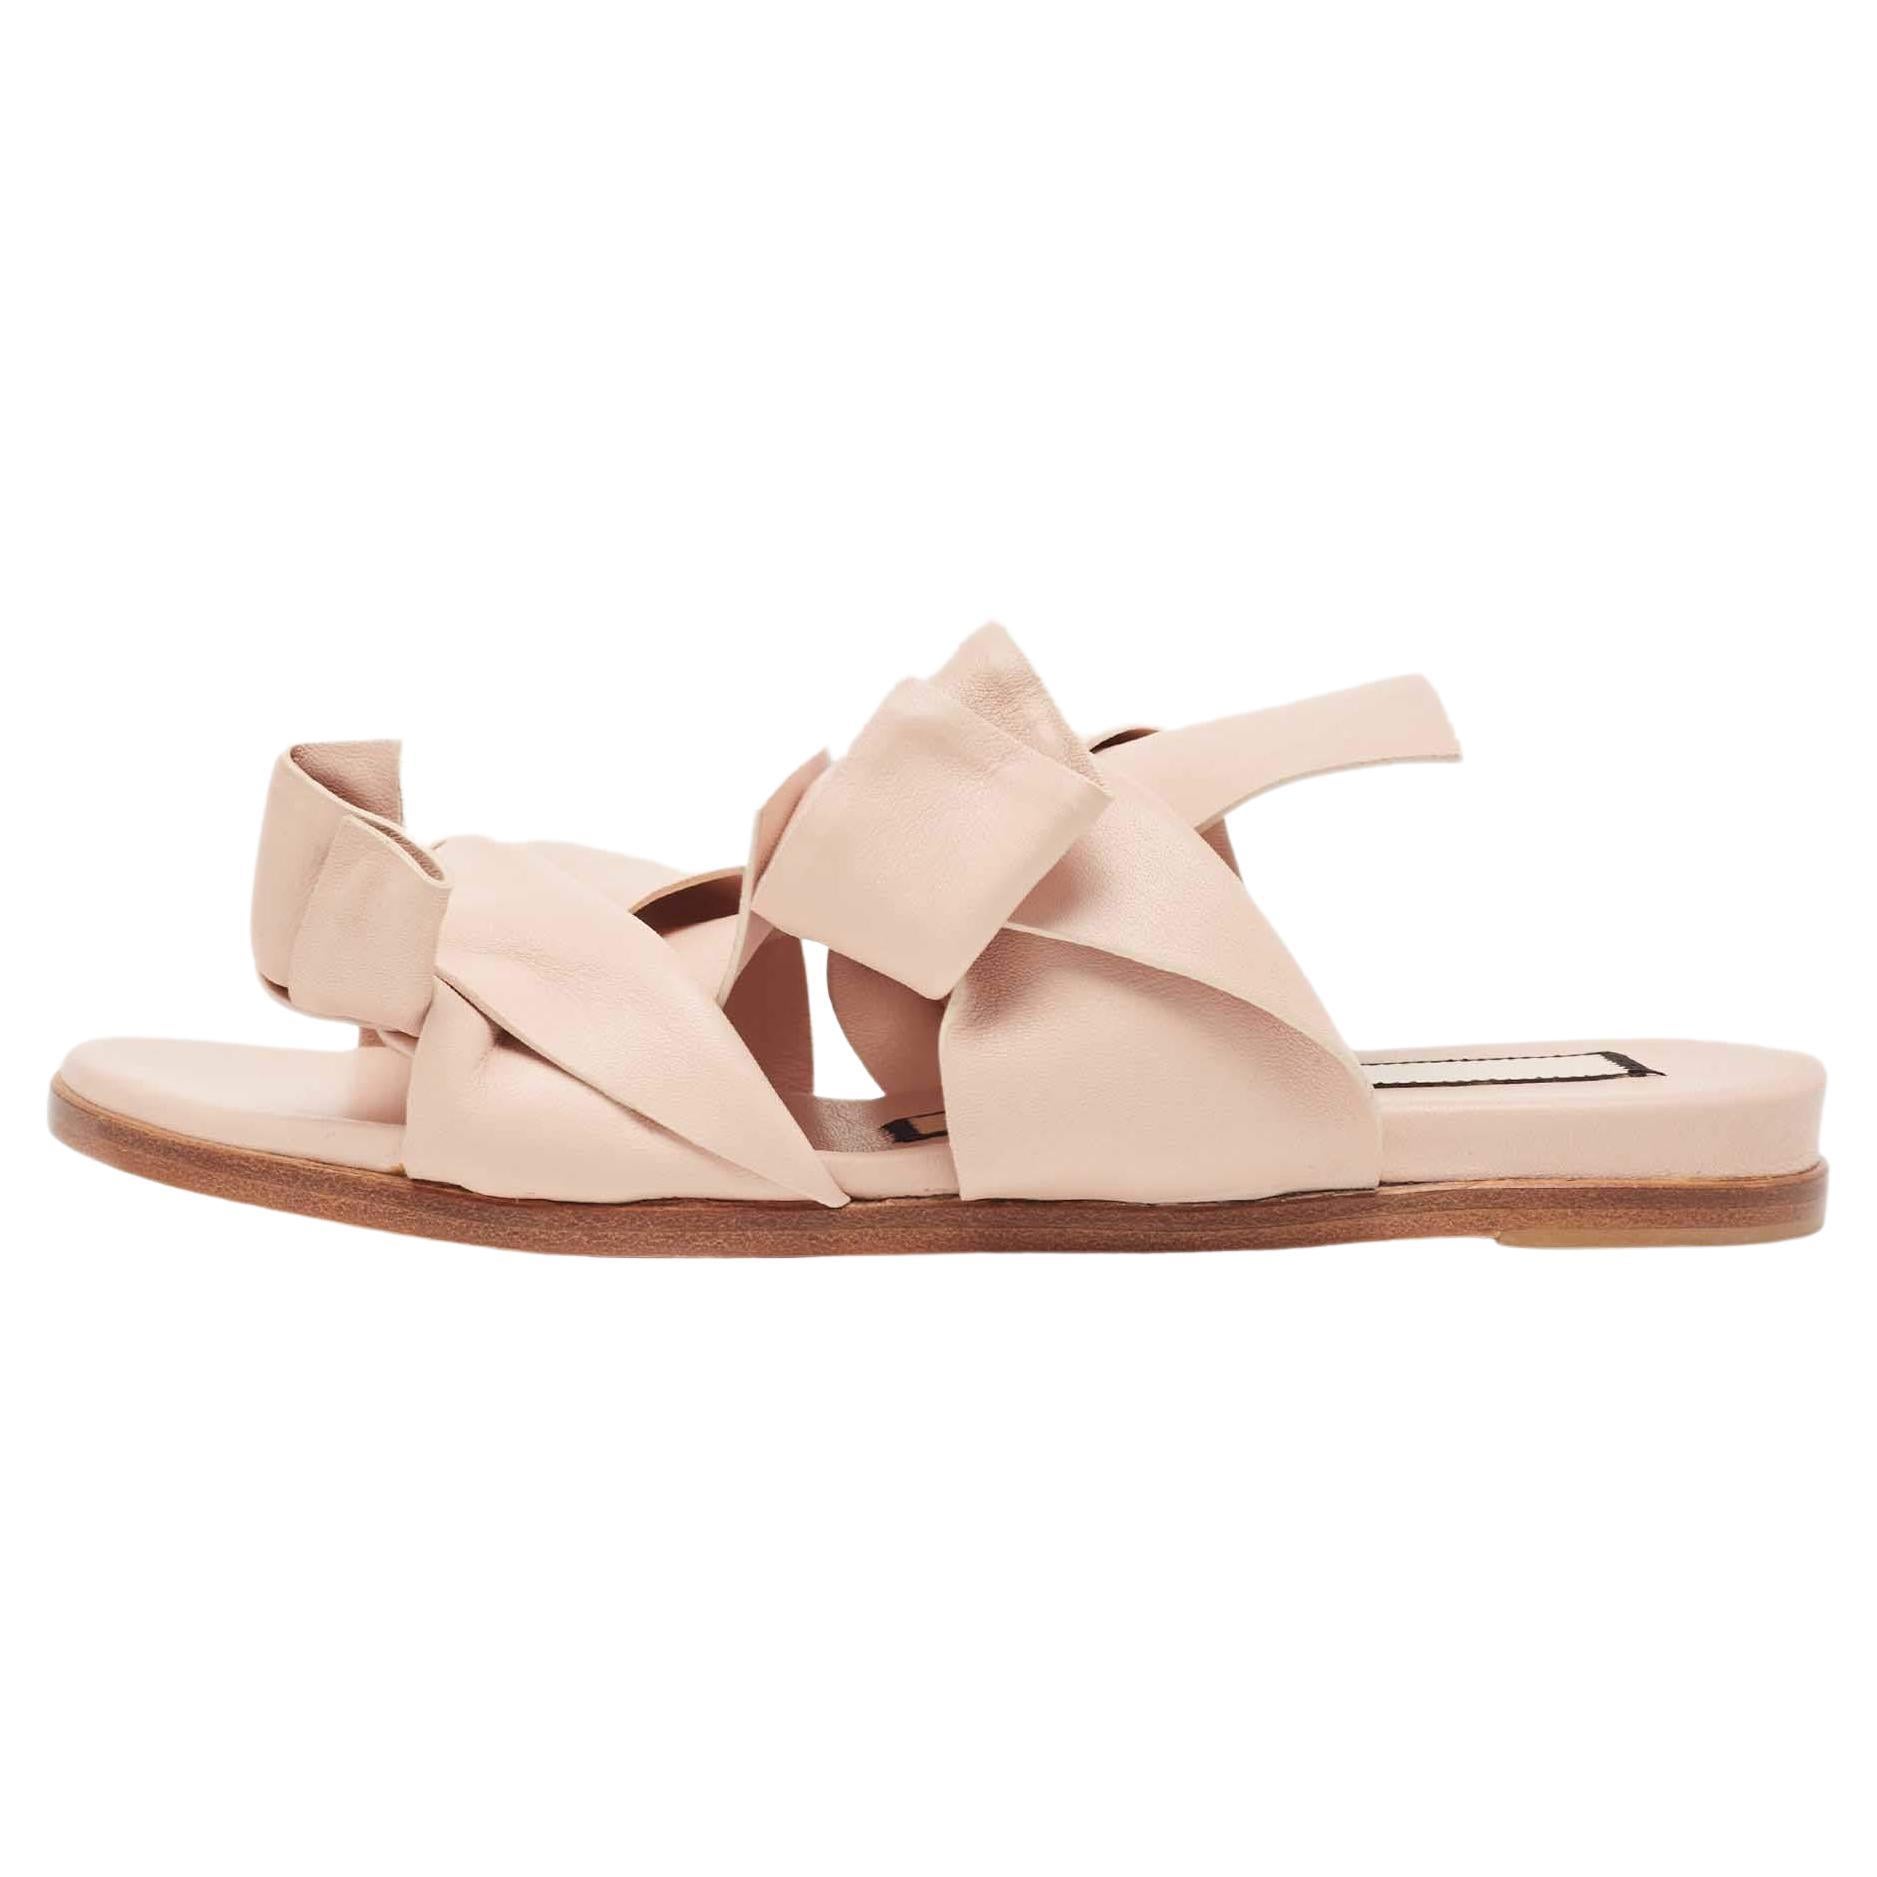 N21 Beige Leather Knot Slide Flats Size 37 For Sale